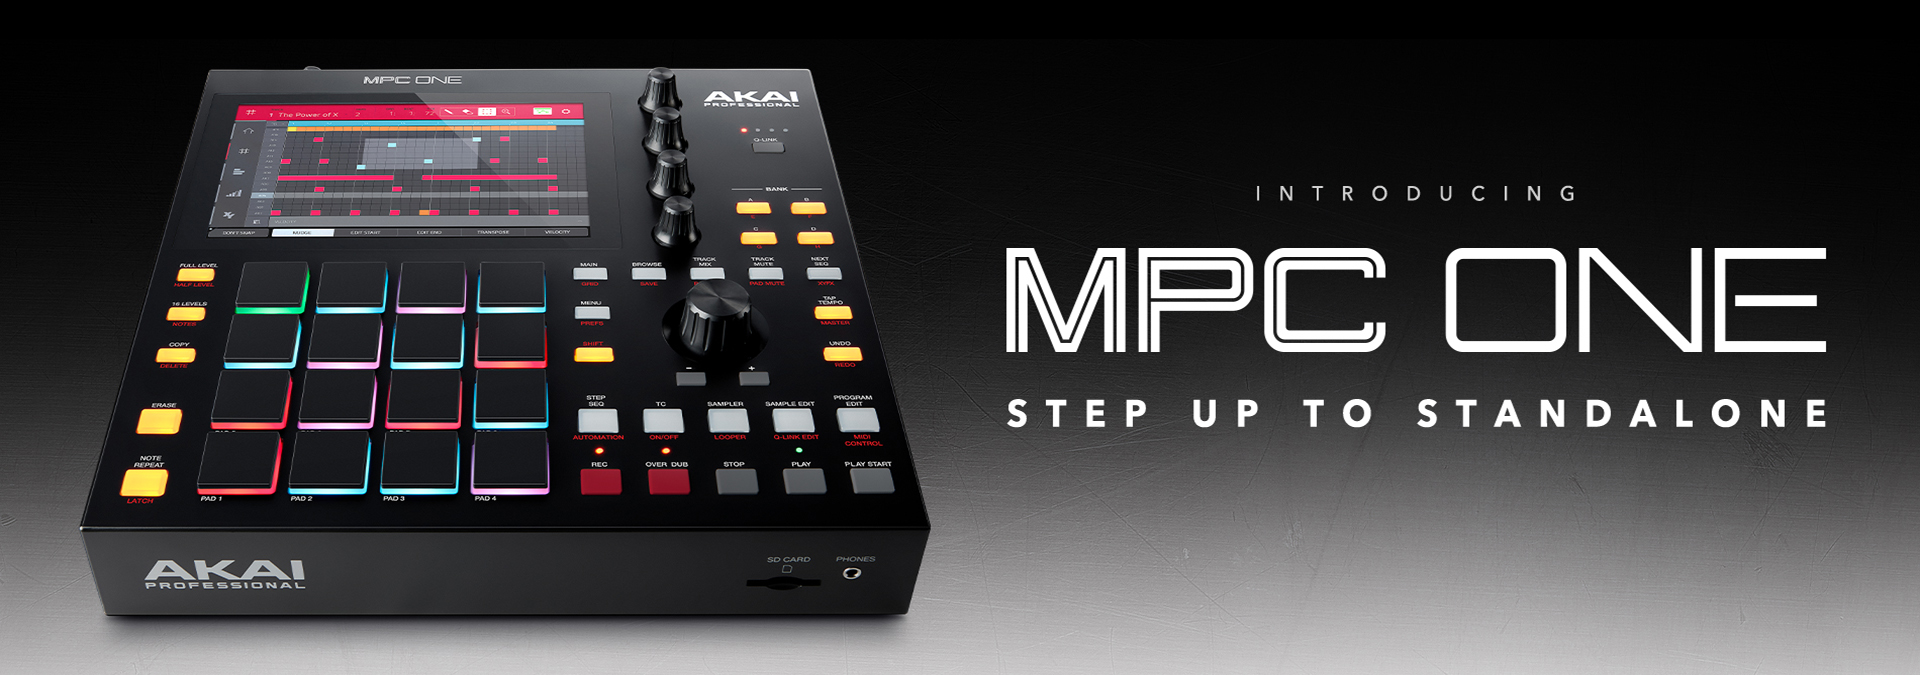 akai professional mpc 60 for sale without hard drive